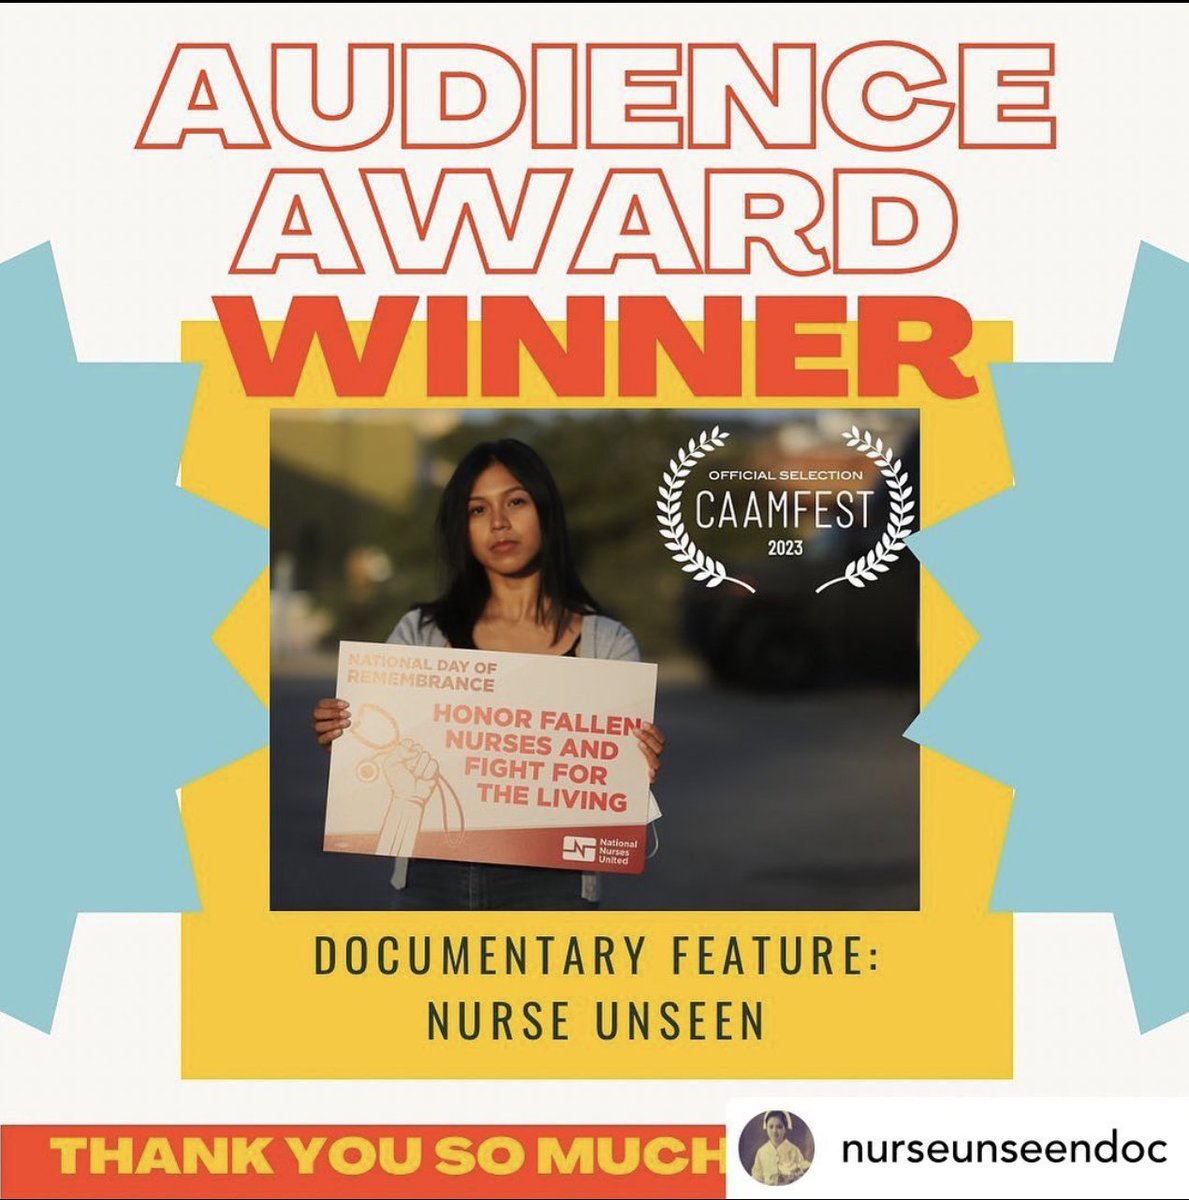 #FYLPROAlumniNews: Congrats to FYLPRO 2022 delegate @michelejosue! @nurseunseendoc: Amazing news!!! The votes are in and NURSE UNSEEN is the winner of the CAAMFest Audience Award for Documentary! 🎉❤️🥹🙏🏽
Thank you so much to @caam and Bay Area audience for this incredible honor